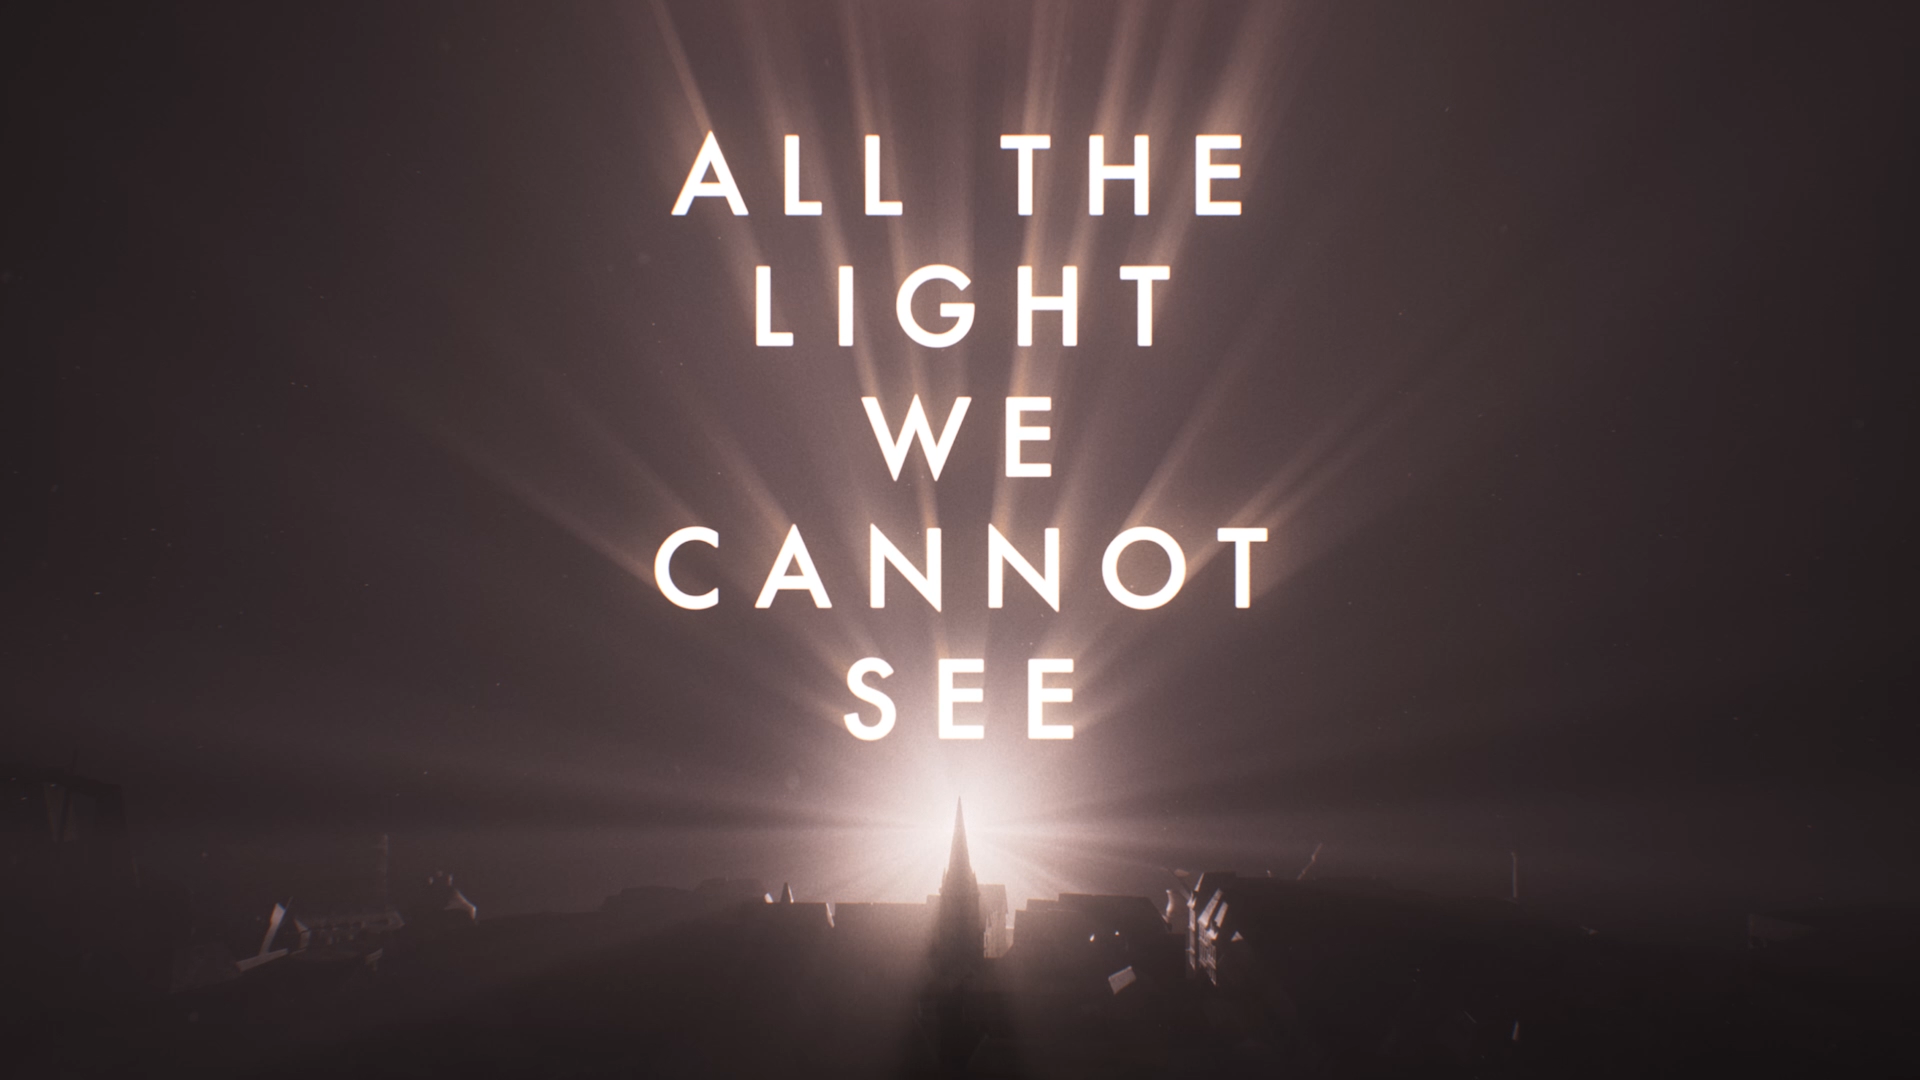 all_the_light_we_cannot_see_-_main_title-Original.00_01_17_05.Still020